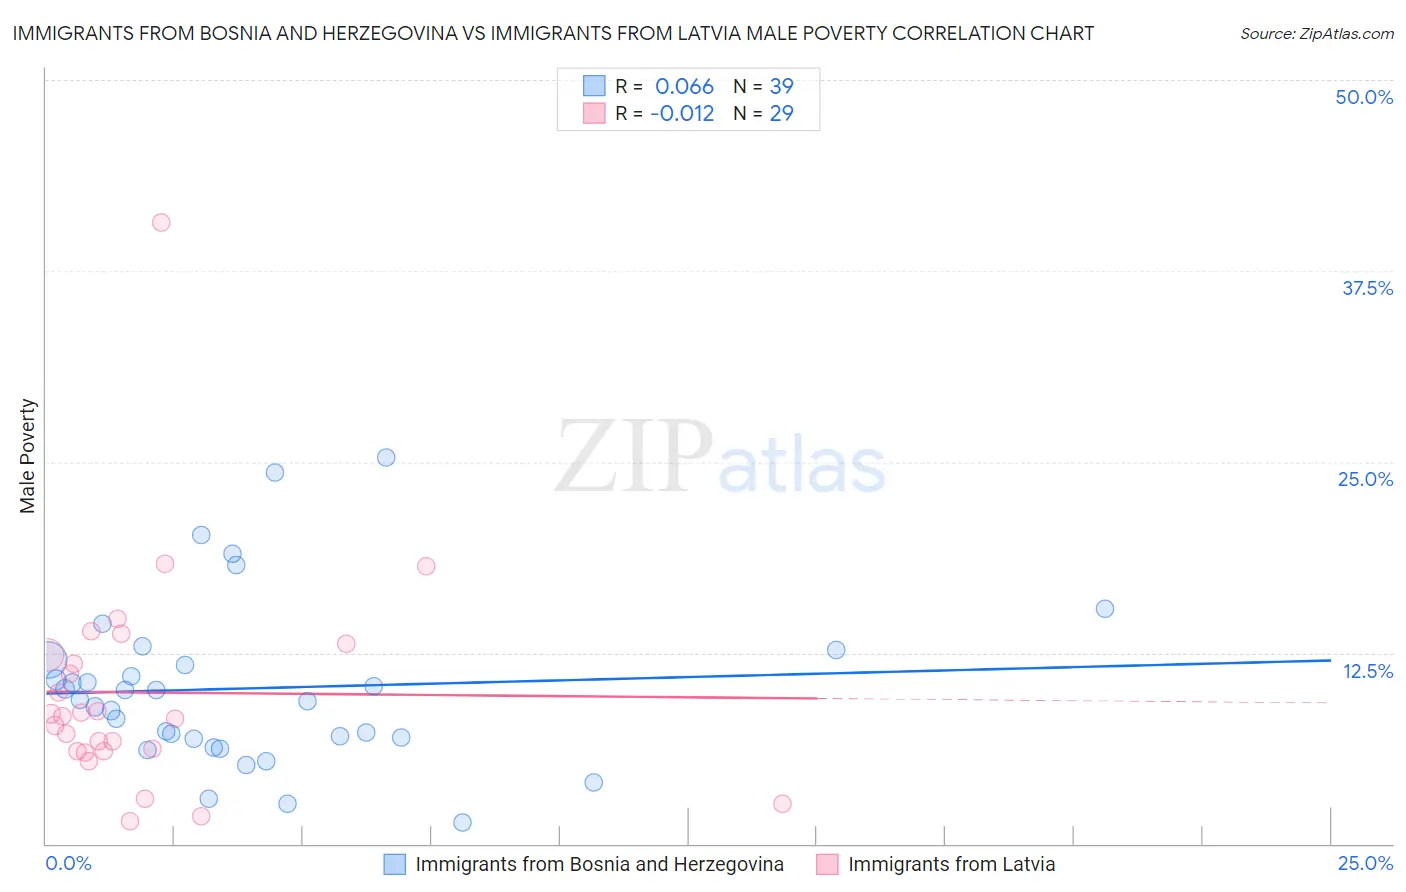 Immigrants from Bosnia and Herzegovina vs Immigrants from Latvia Male Poverty